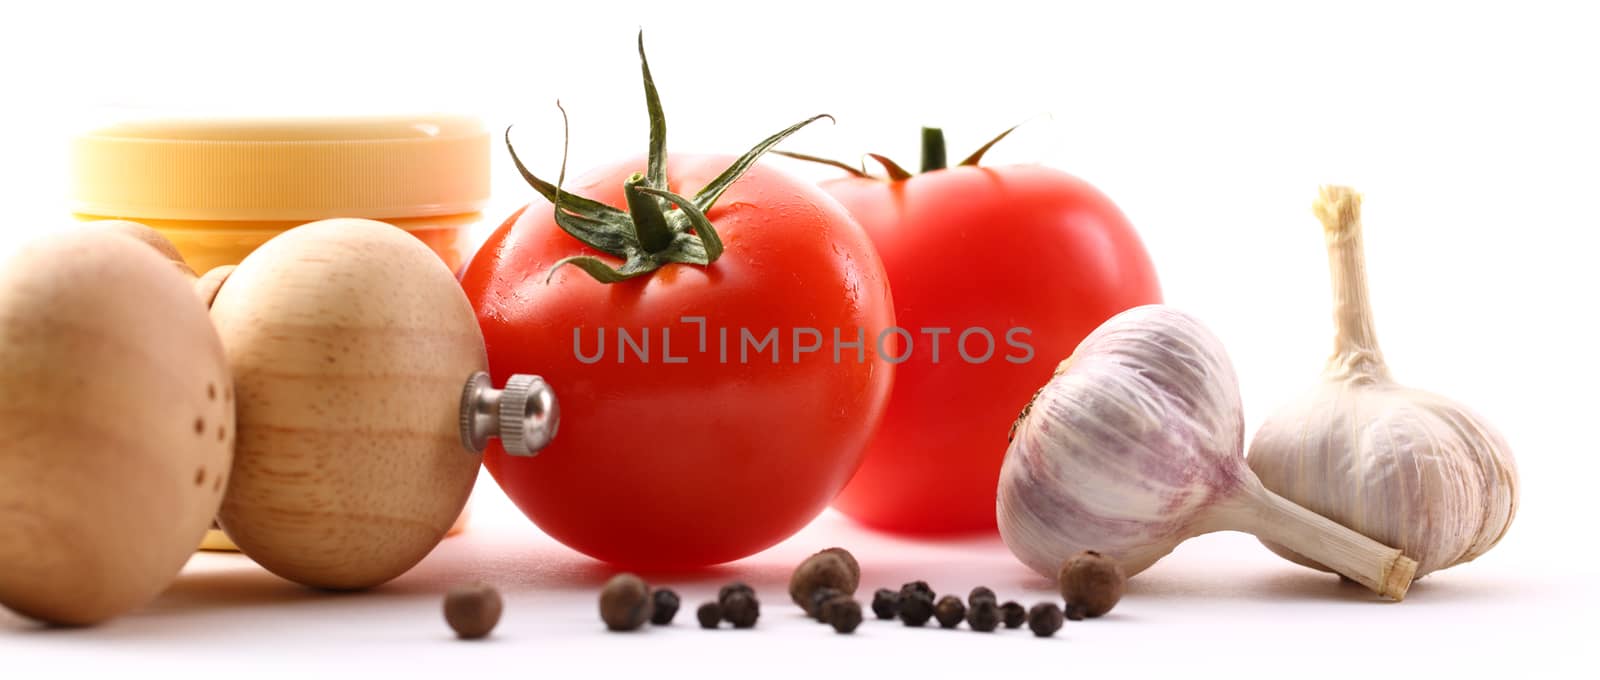 Food ingredients with tomatoes and garlic by Garsya